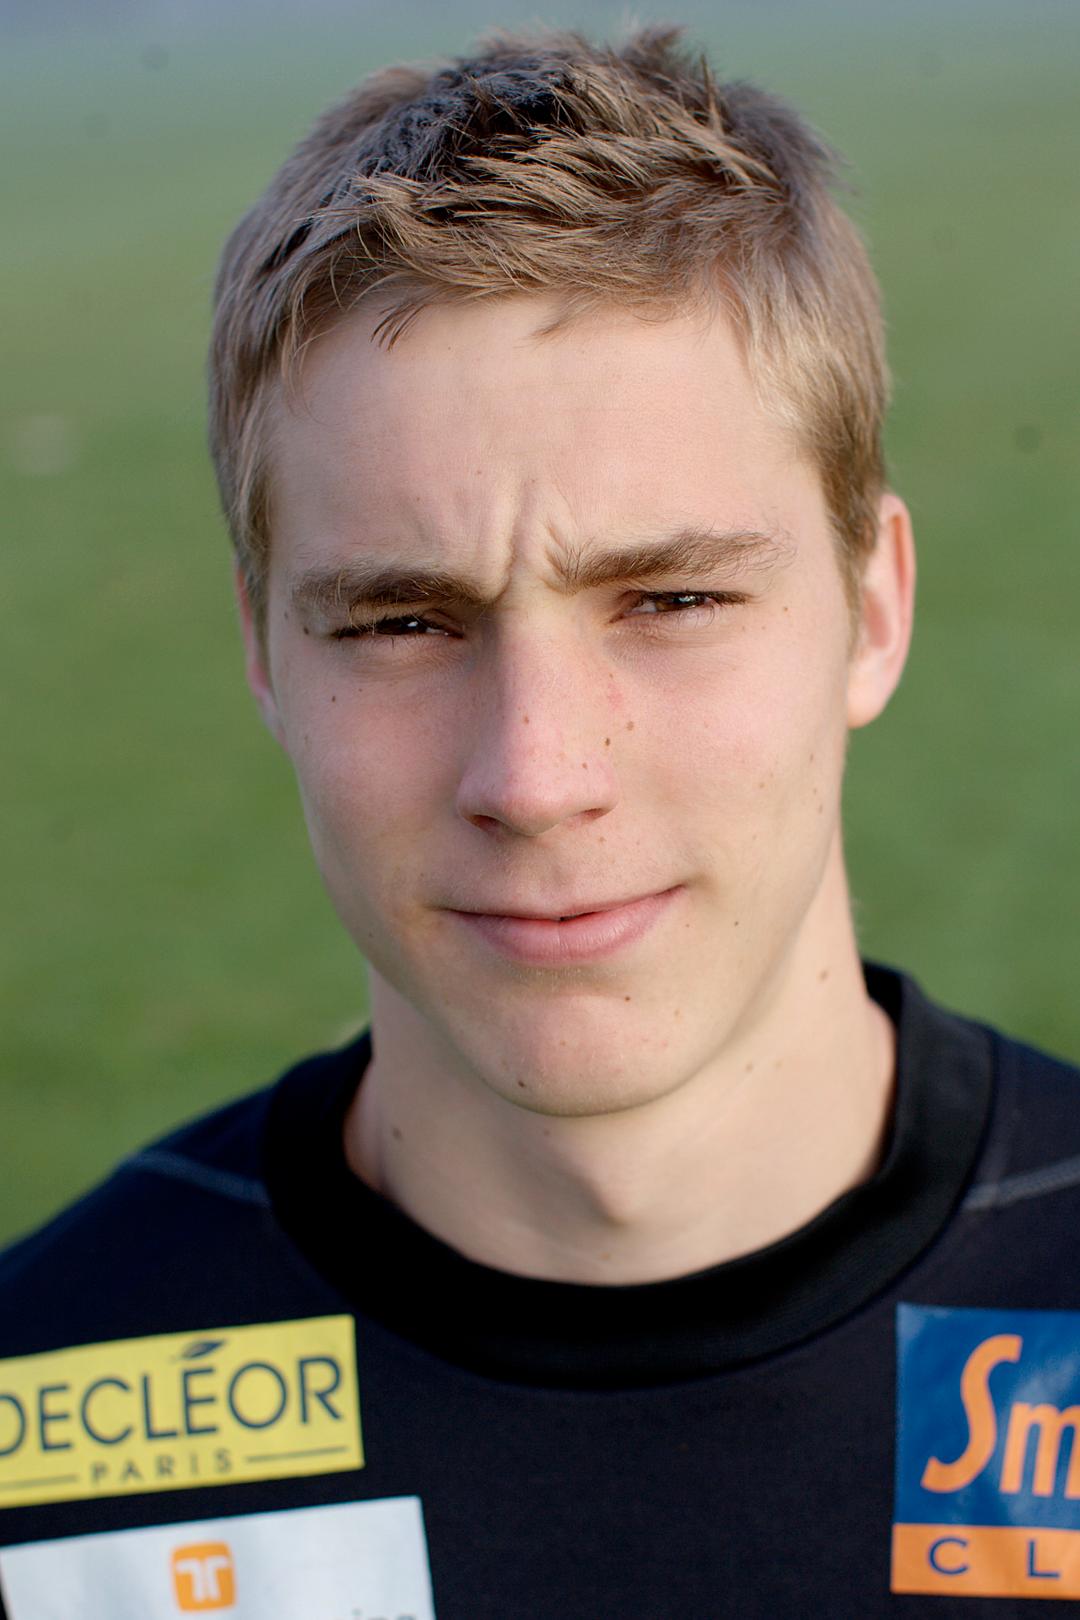 Mads Dahm spent NOK 50,000 to save the club from bankruptcy.